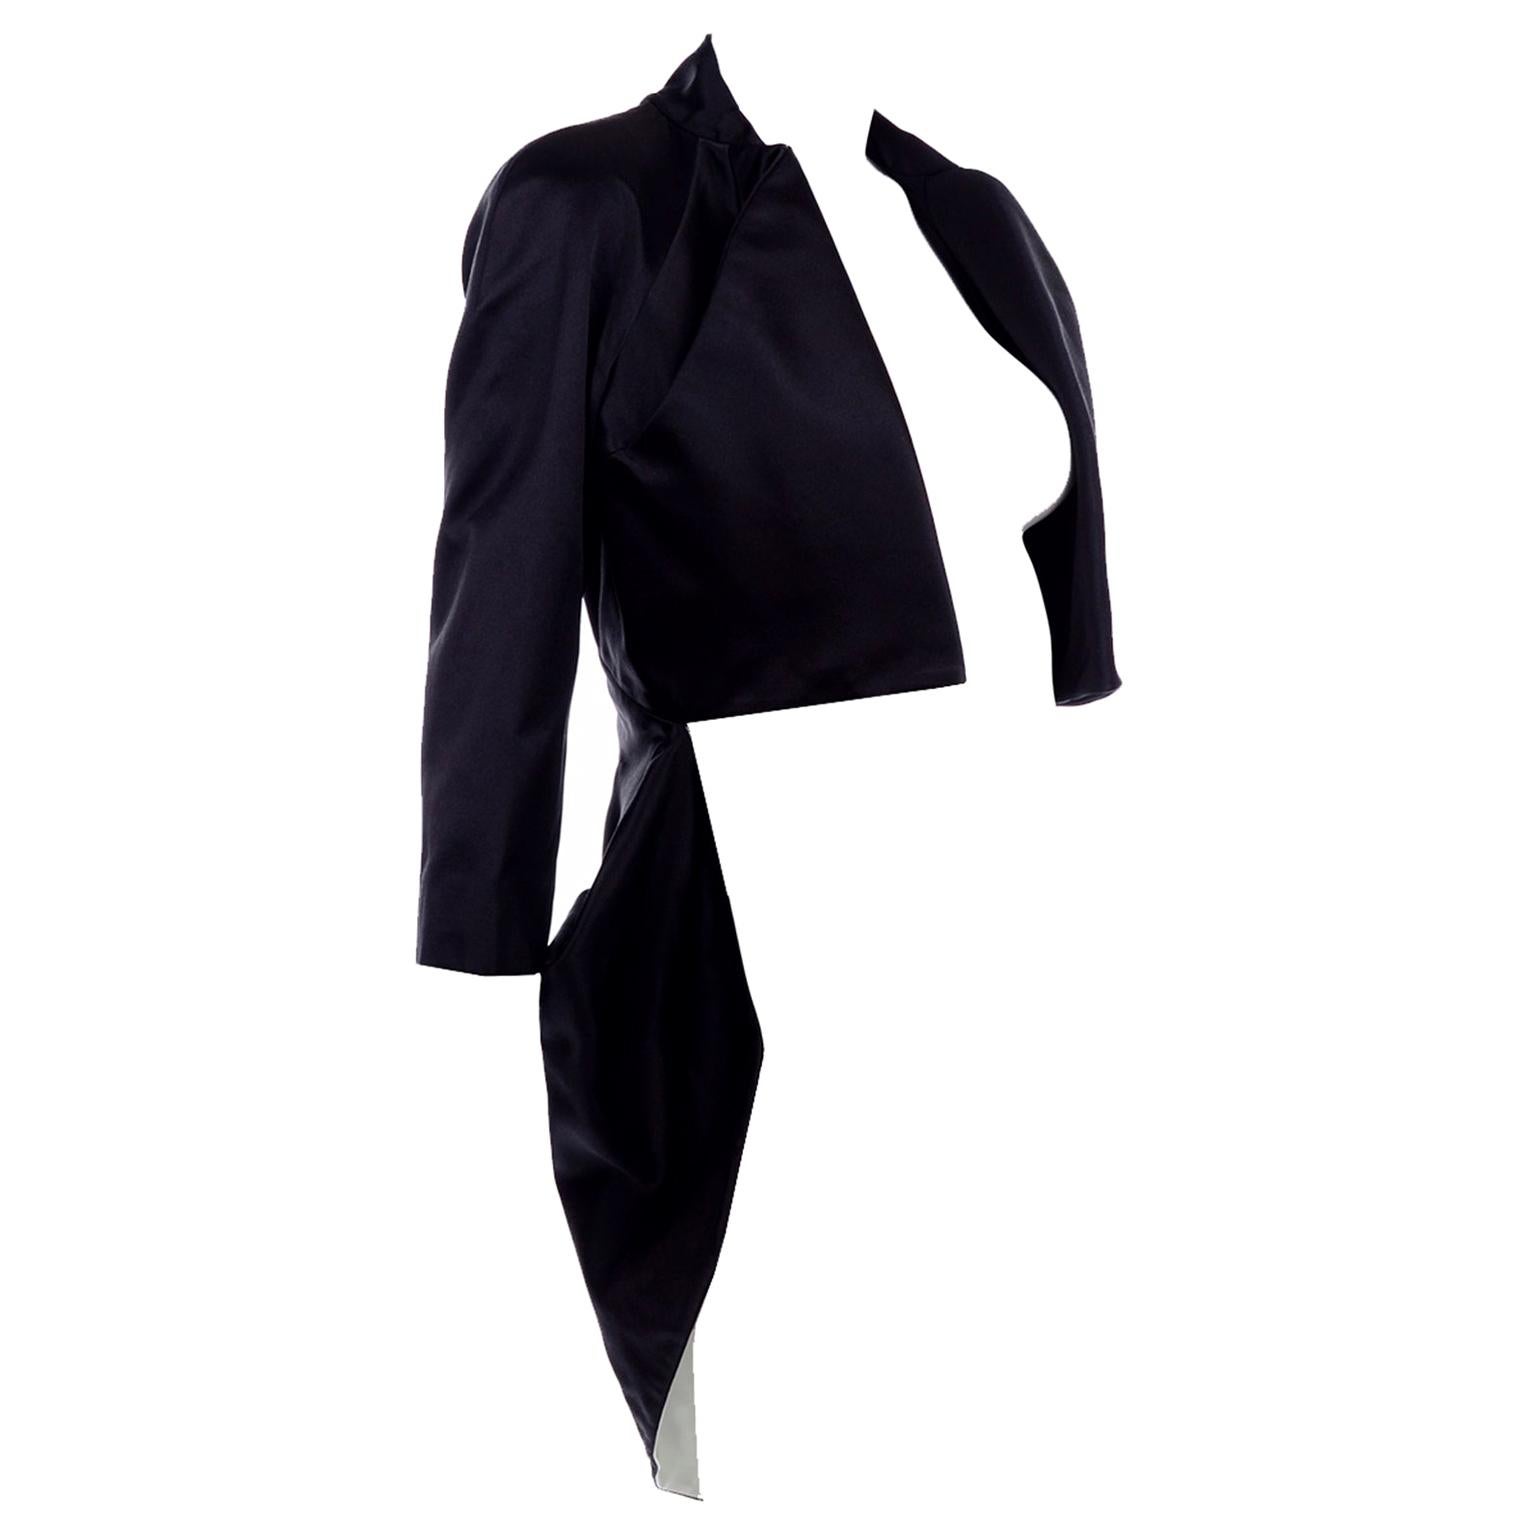 2009 Alexander McQueen Black Silk Cutaway Cropped Tuxedo Jacket With Tails